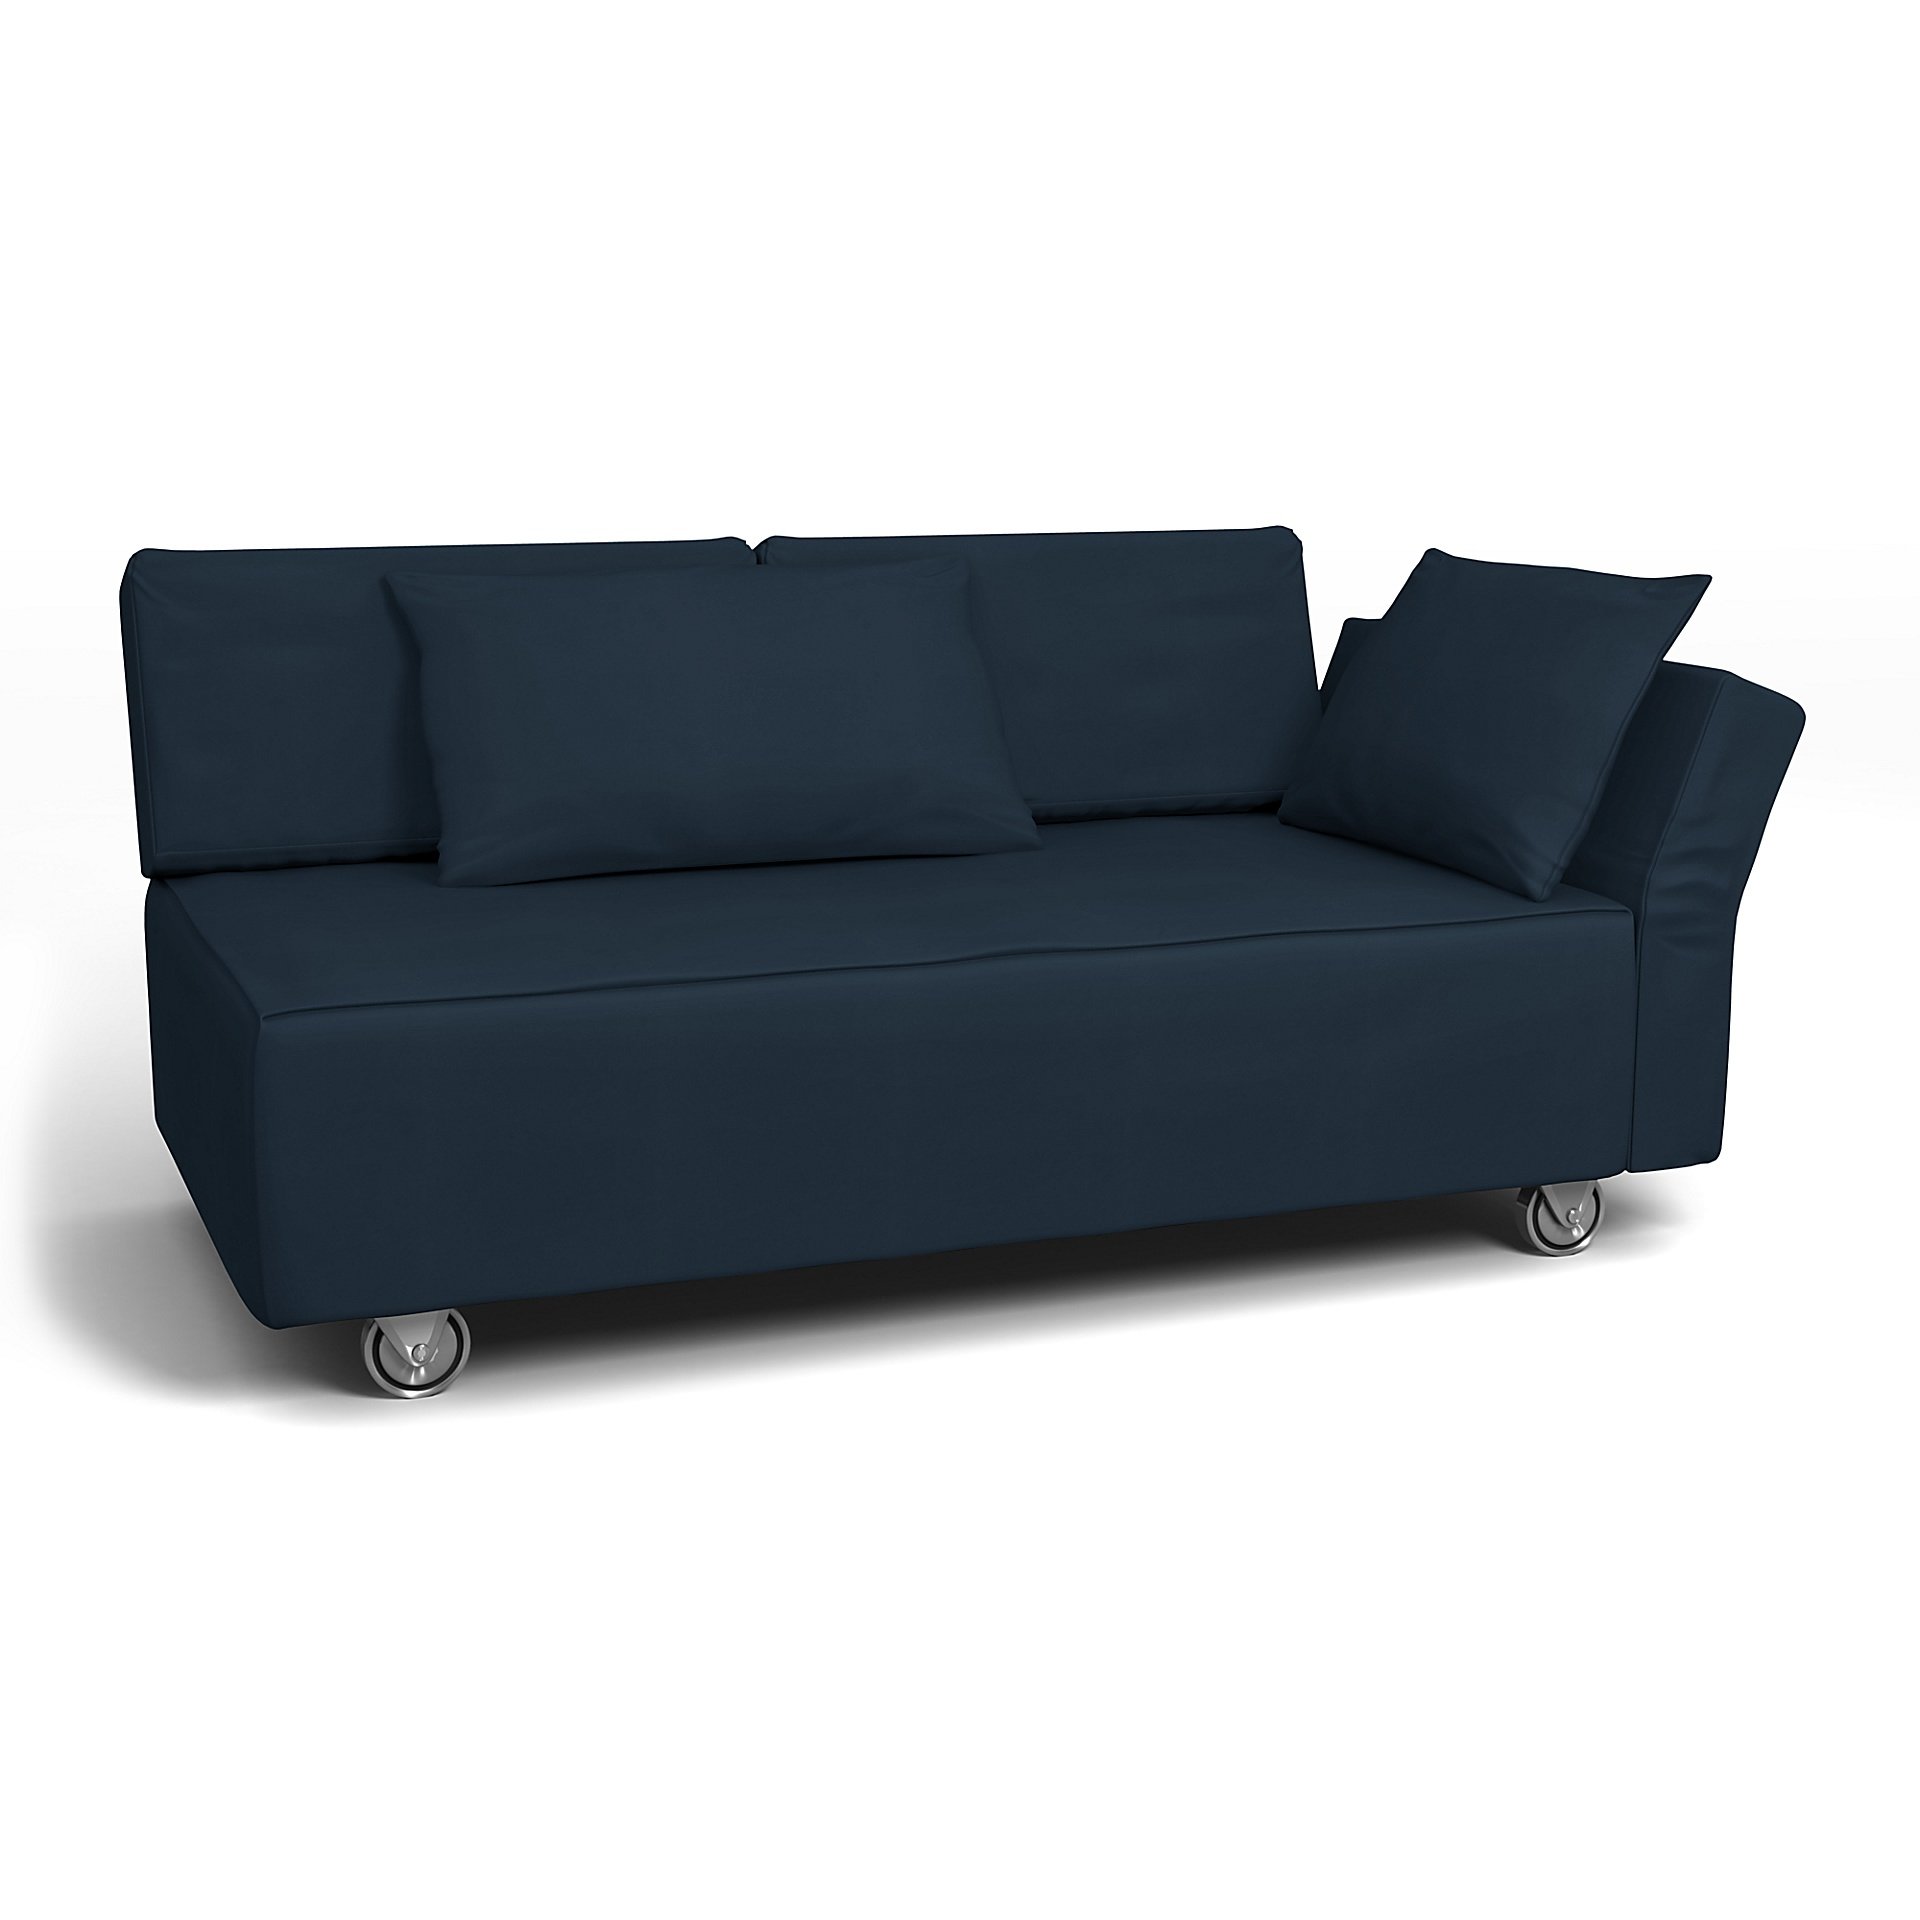 IKEA - Falsterbo 2 Seat Sofa with Right Arm Cover, Navy Blue, Cotton - Bemz